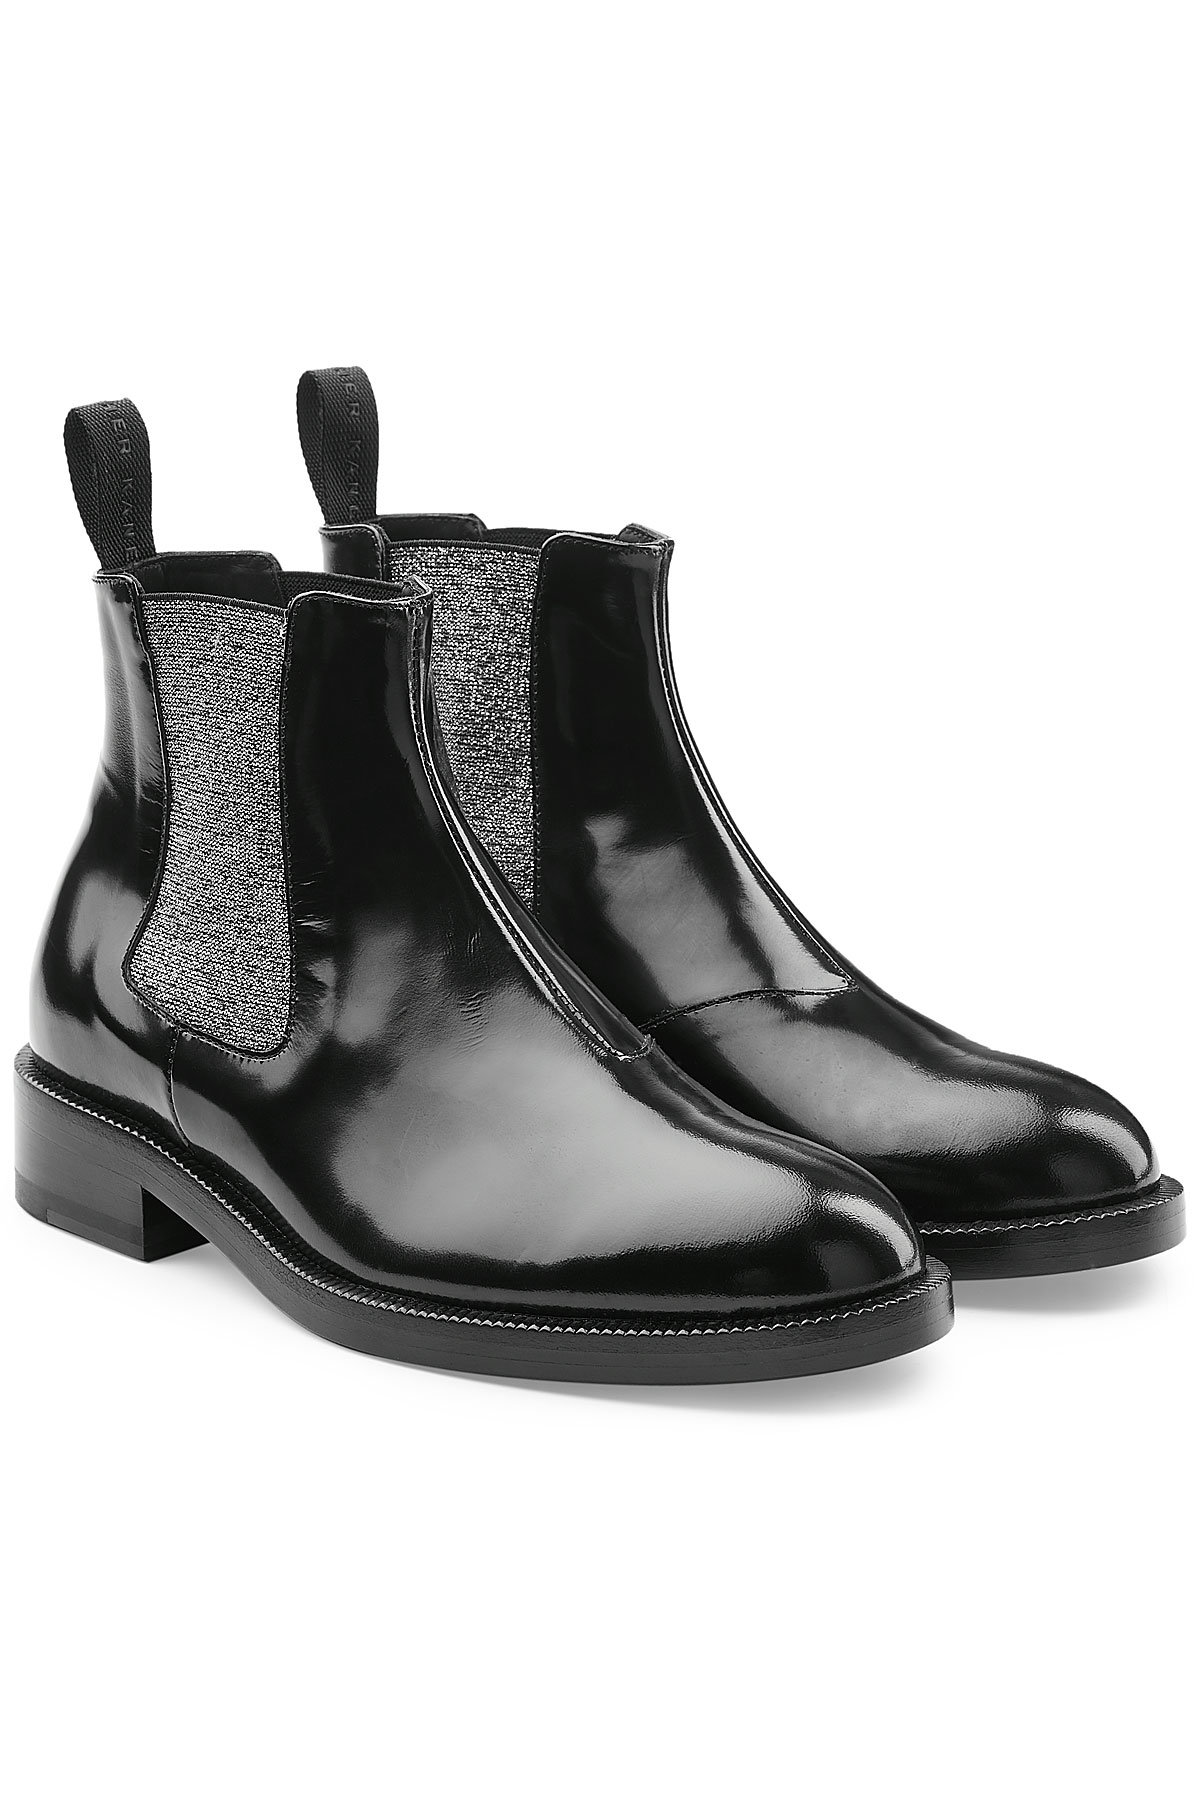 Christopher Kane - DNA Ankle Boots in Leather